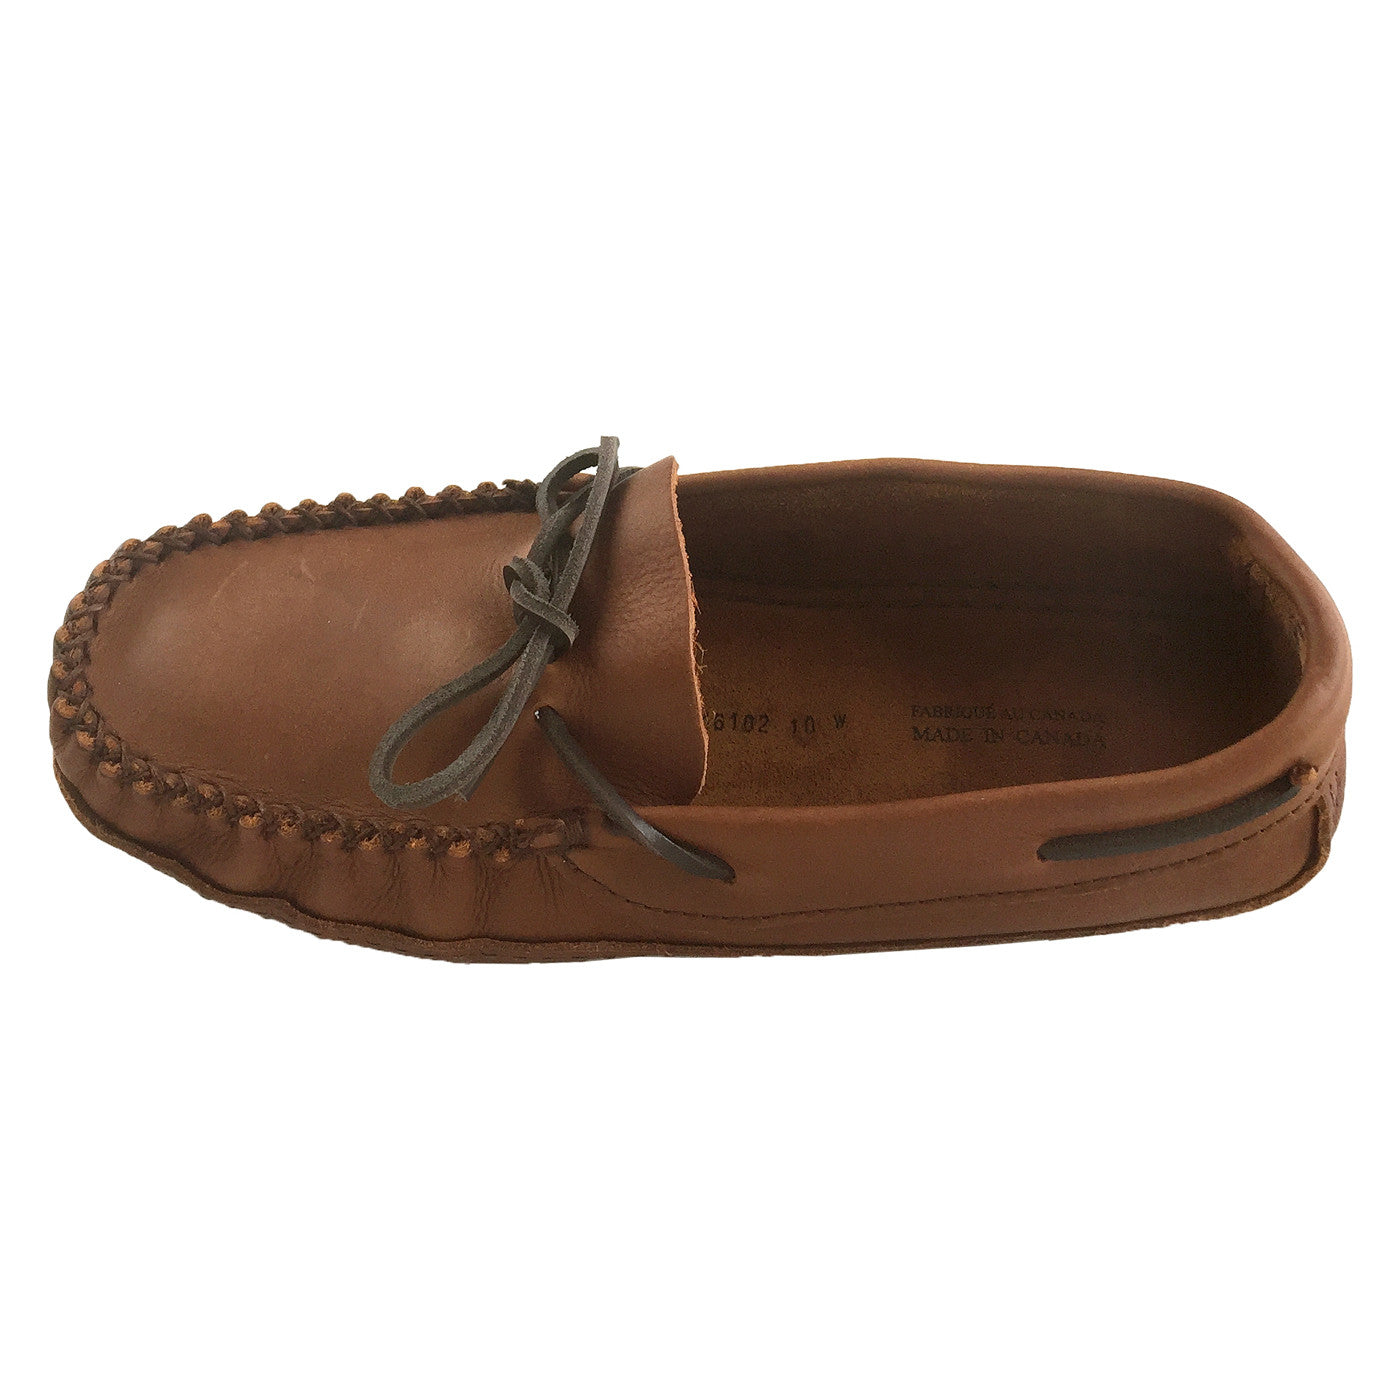 moccasins for wide feet